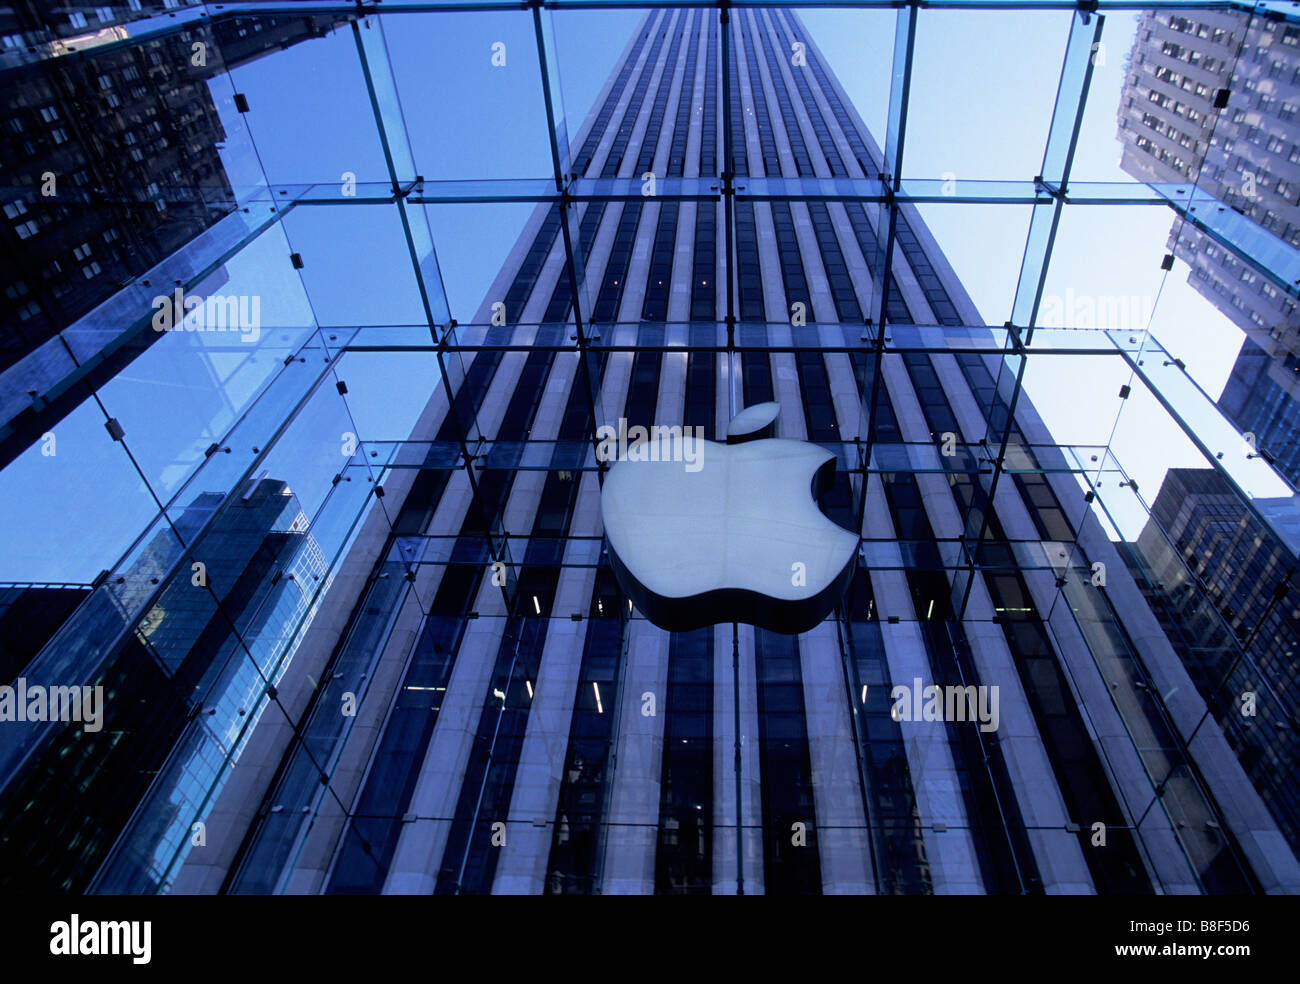 USA New York City The Apple Store Interior With View of The General Motors Building Through Window Stock Photo